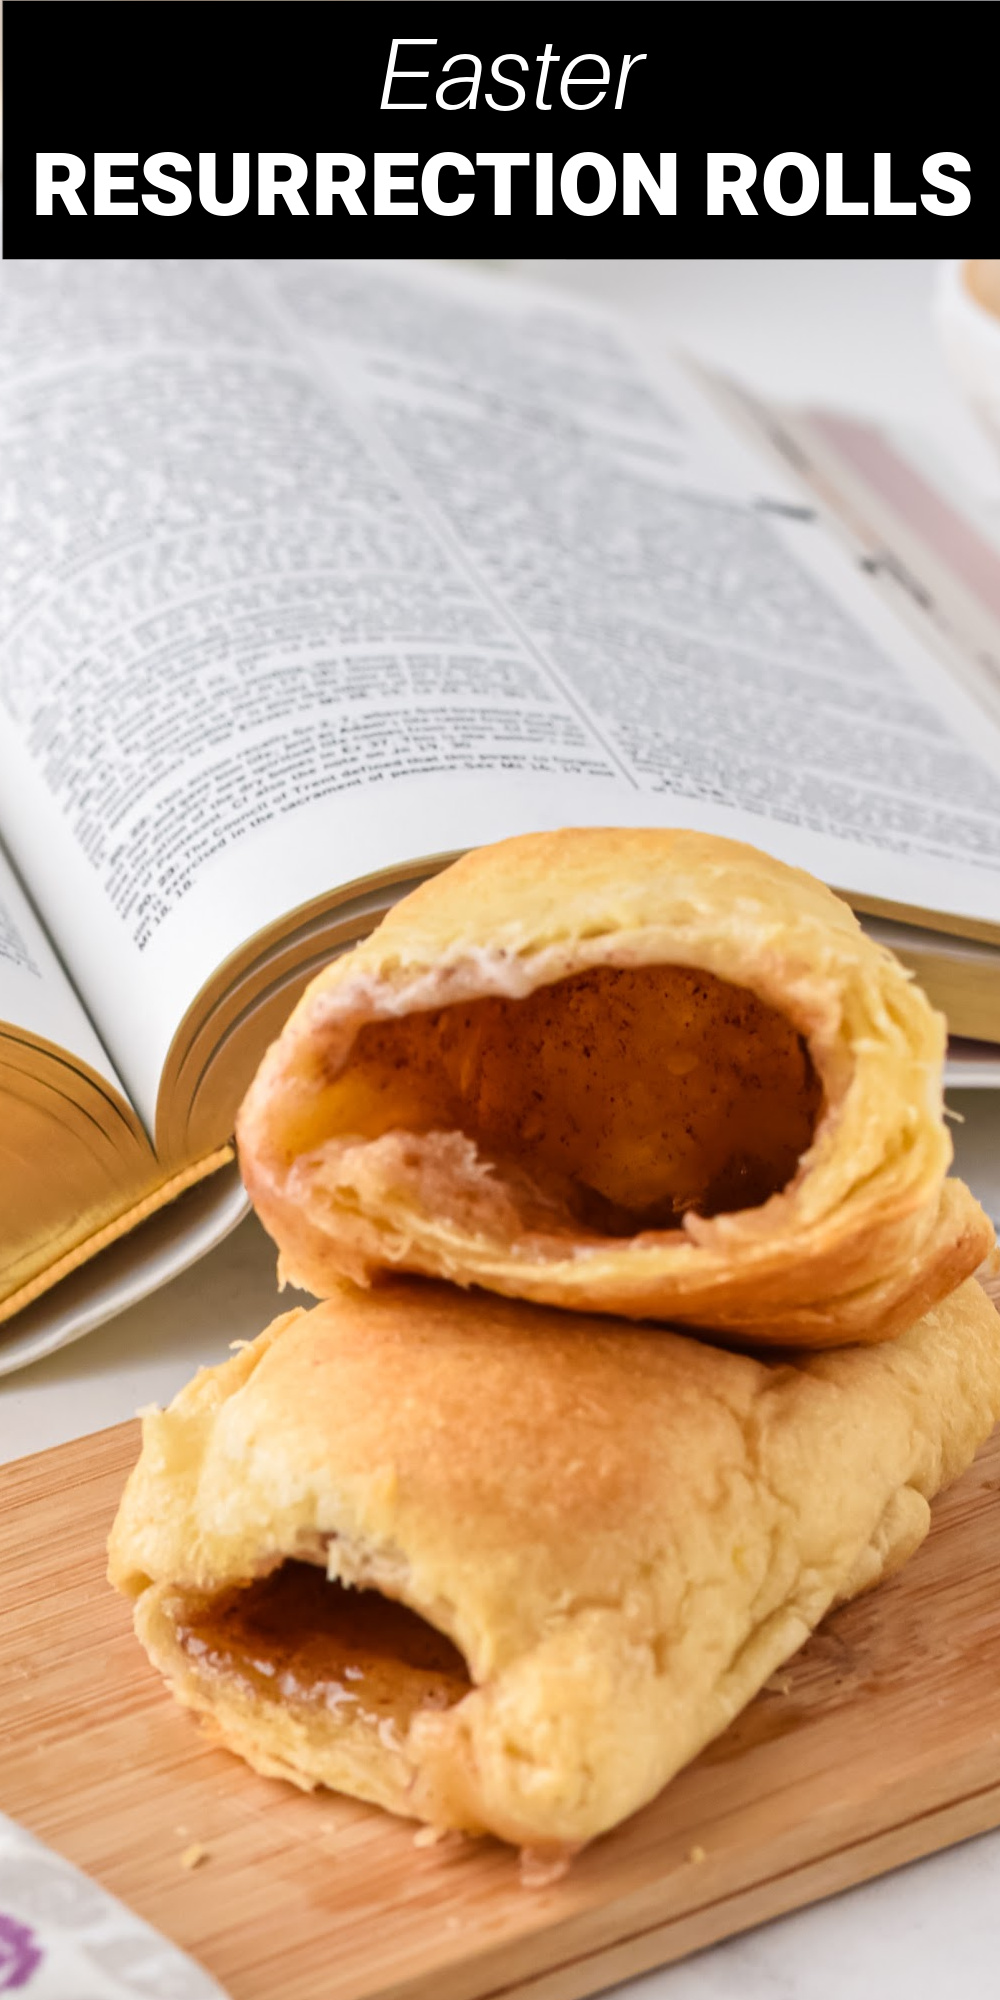 These Resurrection Rolls are sweet, sticky and delicious rolls, but they're also a perfect illustration for the true meaning of Easter and the resurrection of Jesus. Make them a new part of your favorite Easter tradition to share with your kids or grandchildren and they will always remember the story behind them.